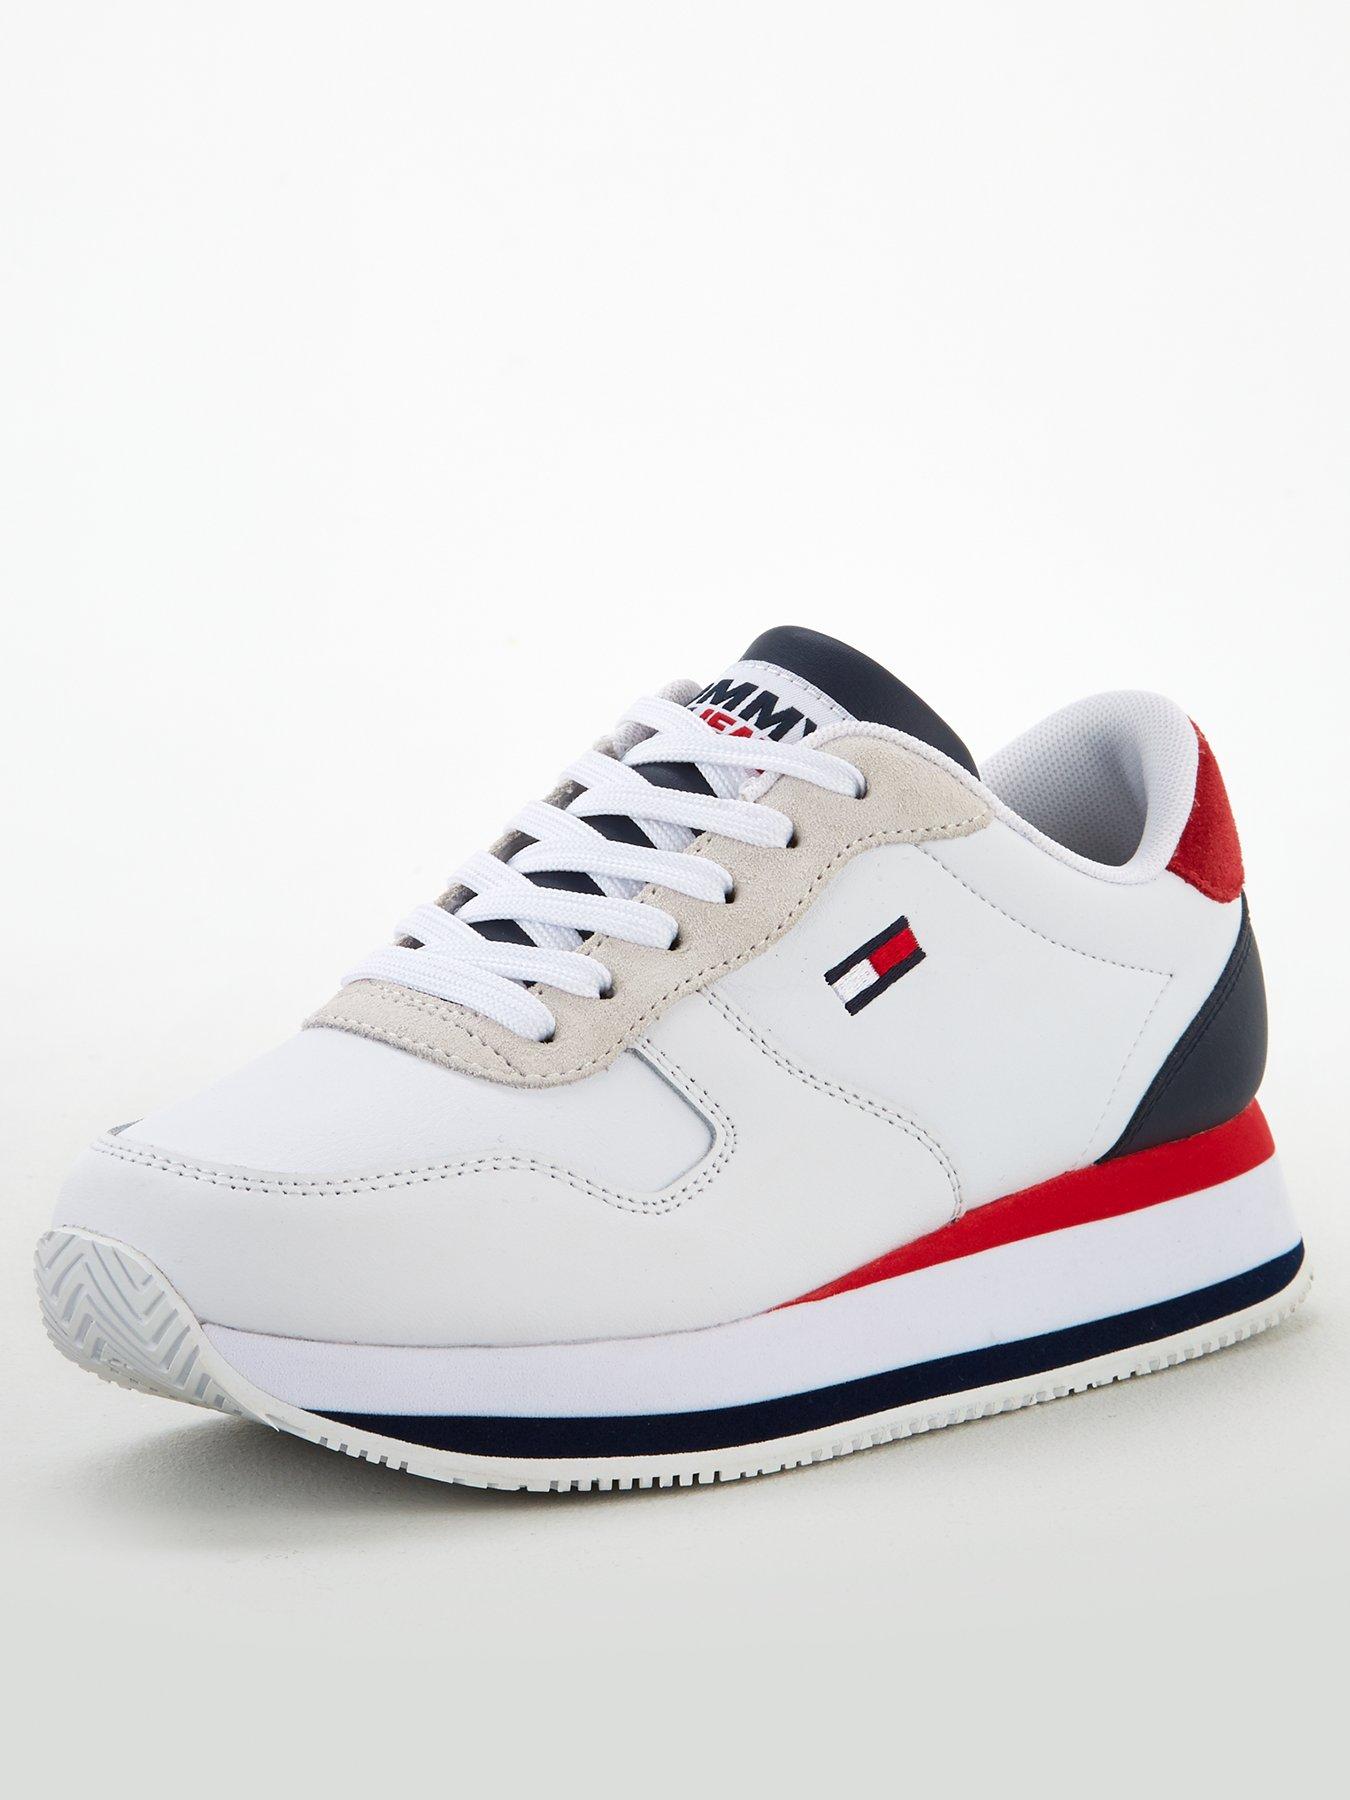 Tommy hilfiger | Womens trainers 